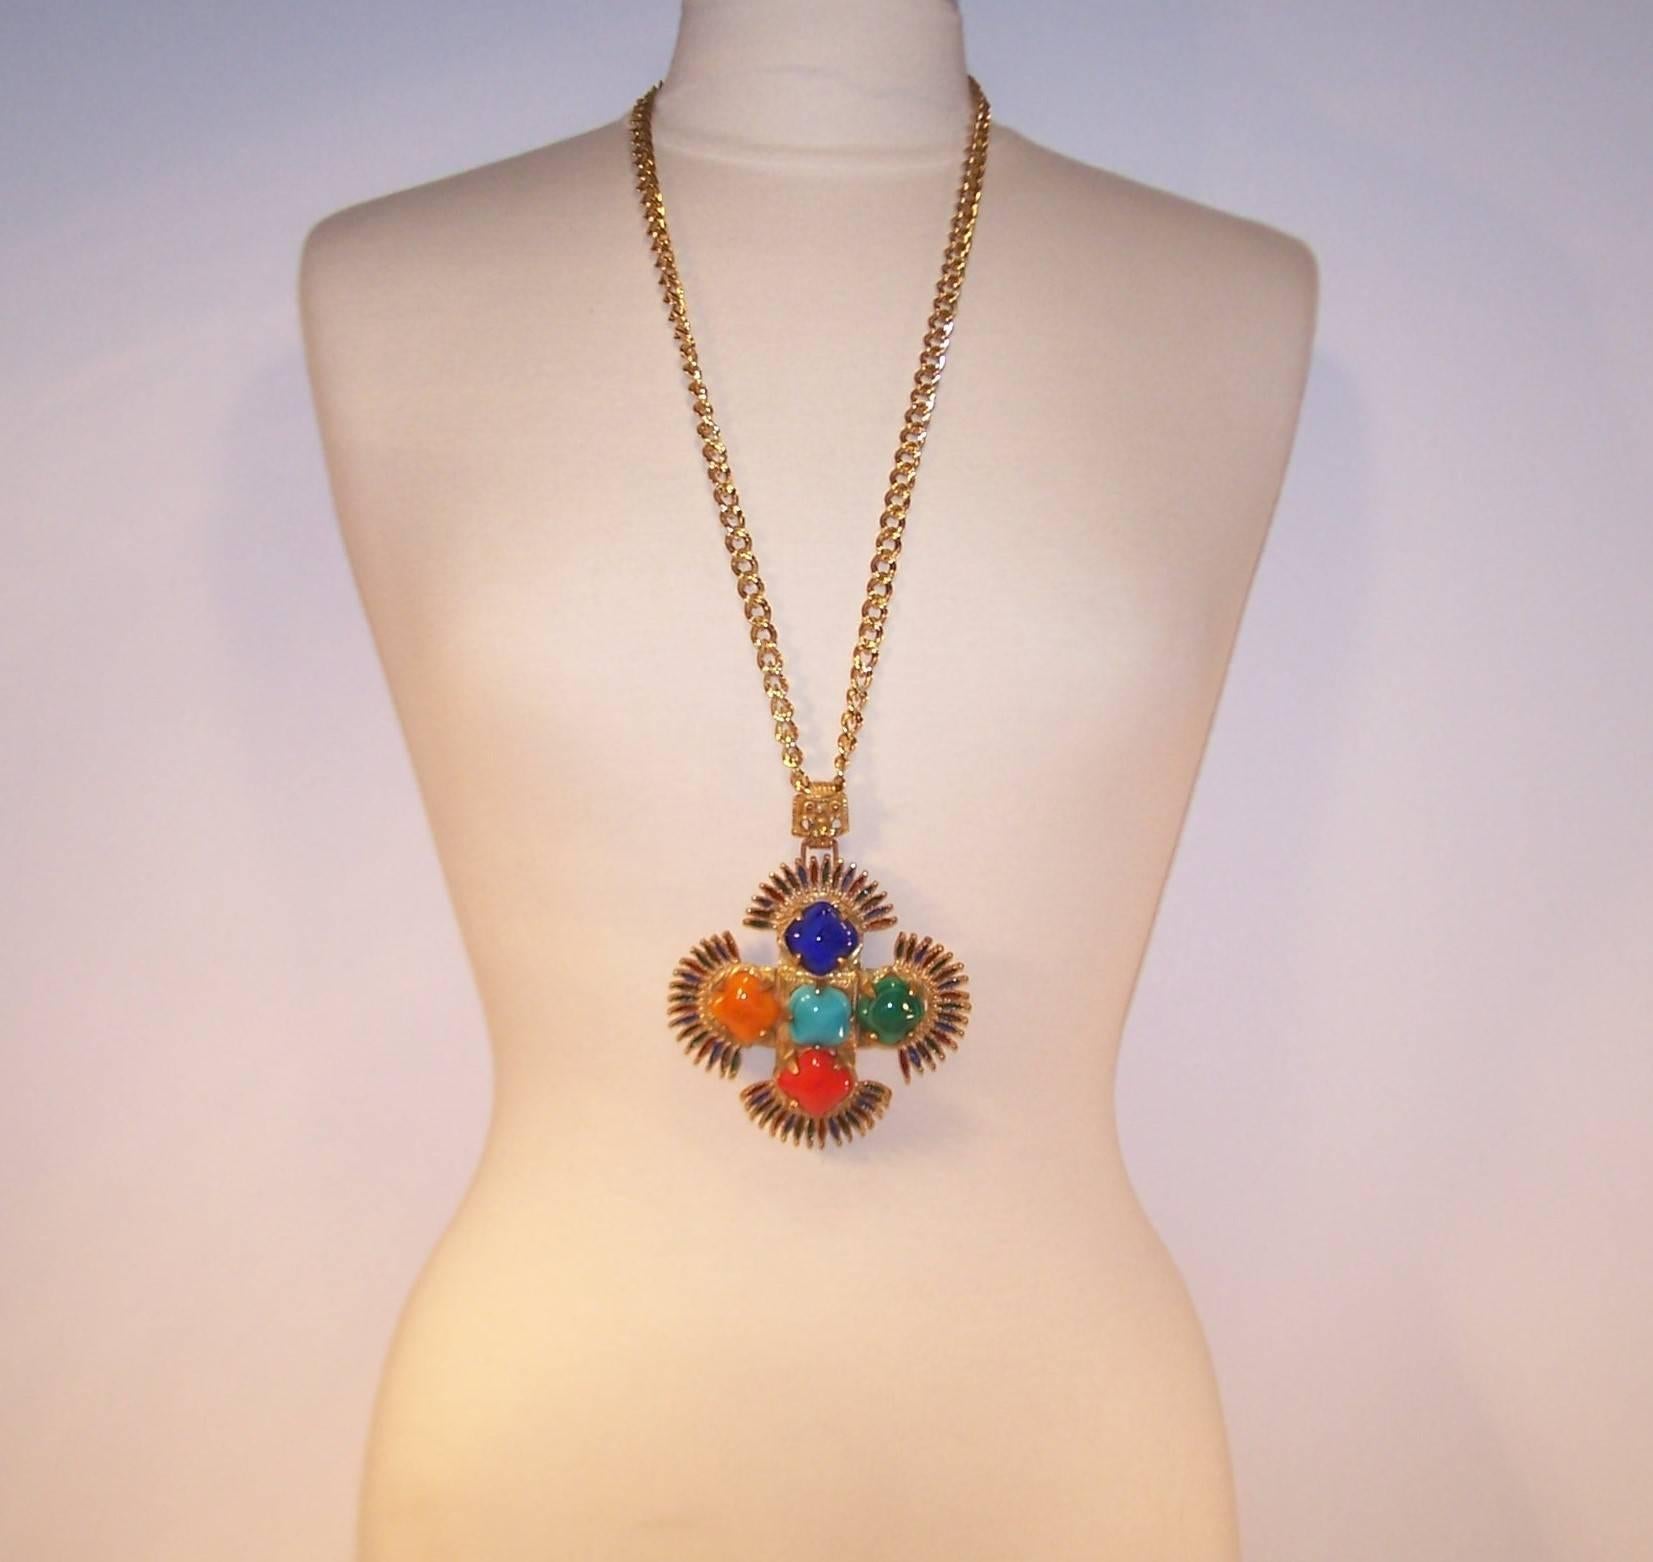 Statement making! ...Runway walking! ...Eye popping!  You name it and this 1970's medallion necklace by Larry Vrba for Castlecliff has it.  Mr. Vrba began his career producing exotic designs for Miriam Haskell.  This medallion necklace is part of a